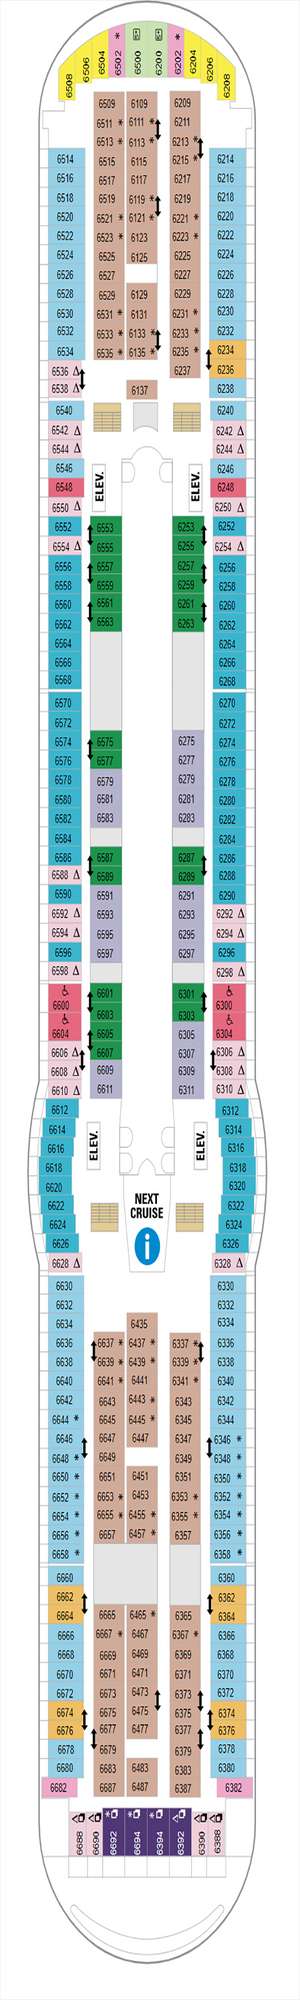 Deck plan for Adventure of the Seas